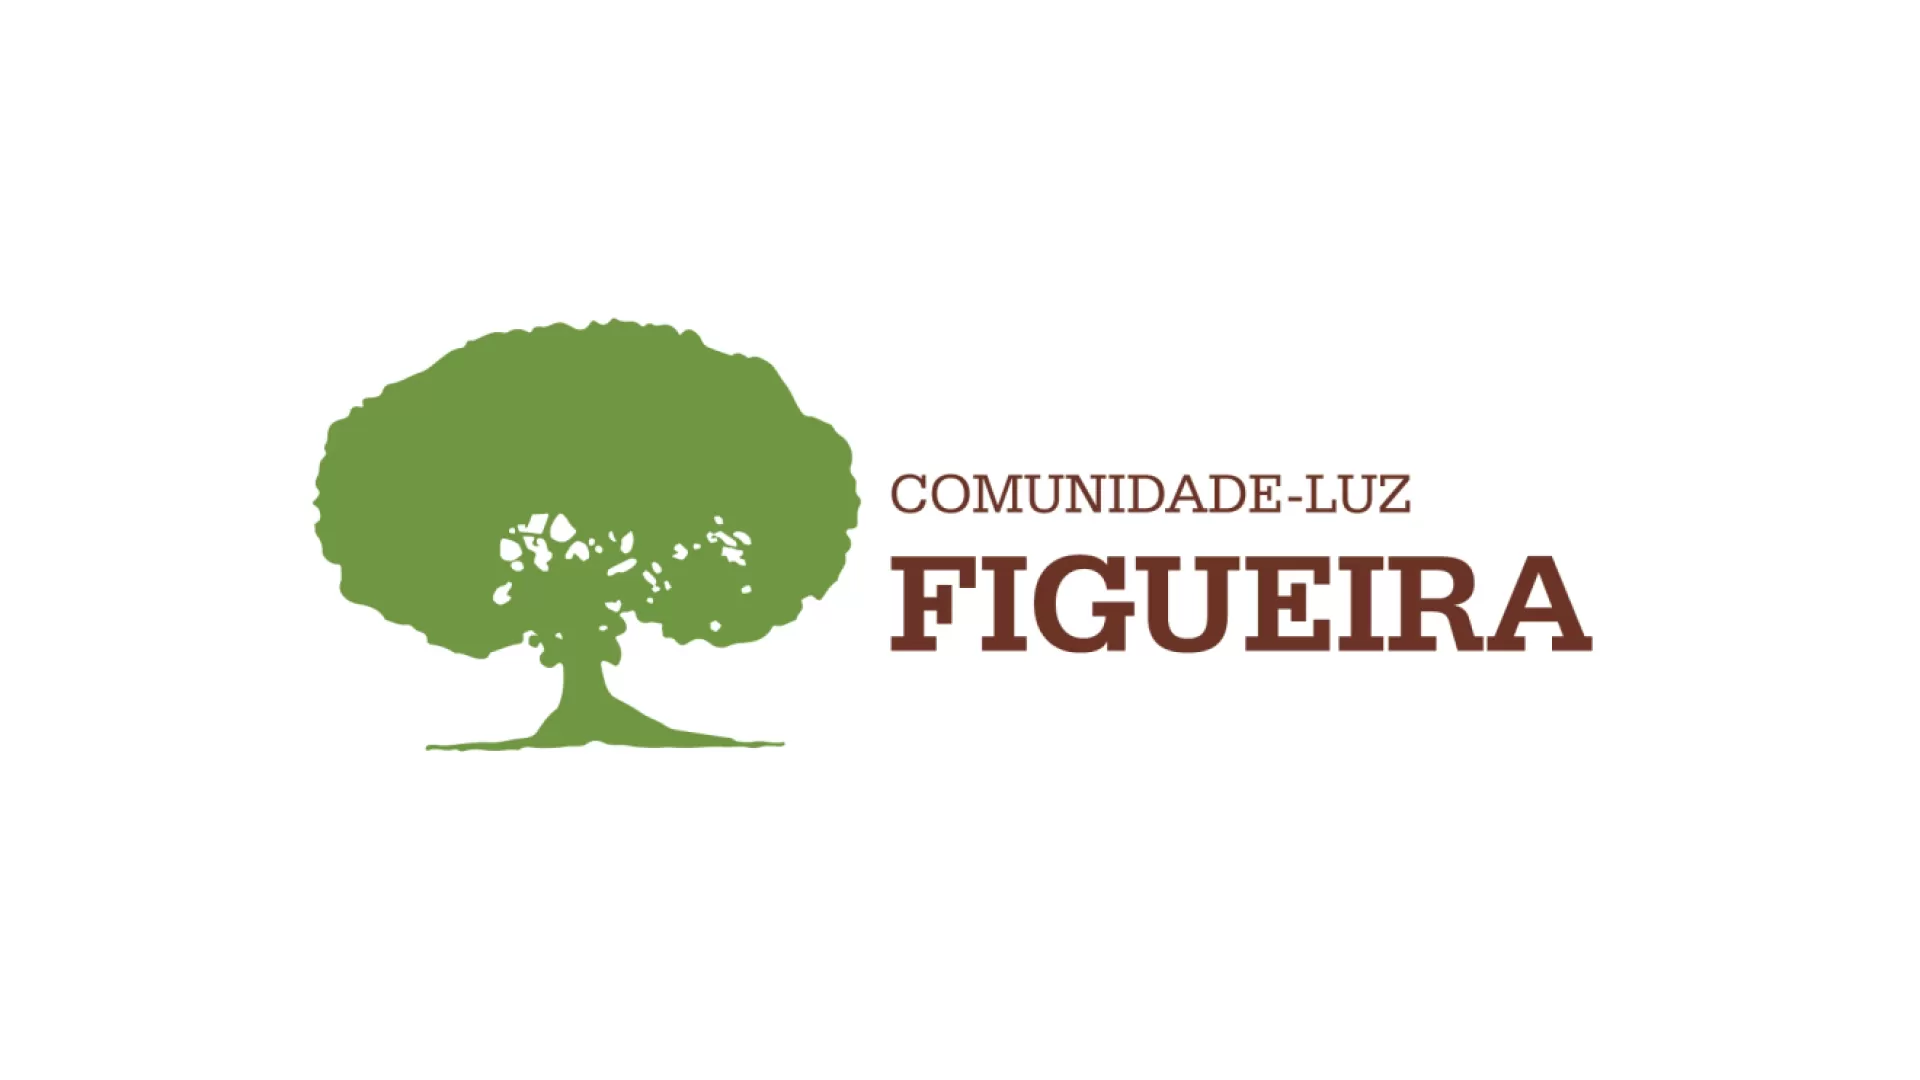 Old logo of the Light Community of Figueira